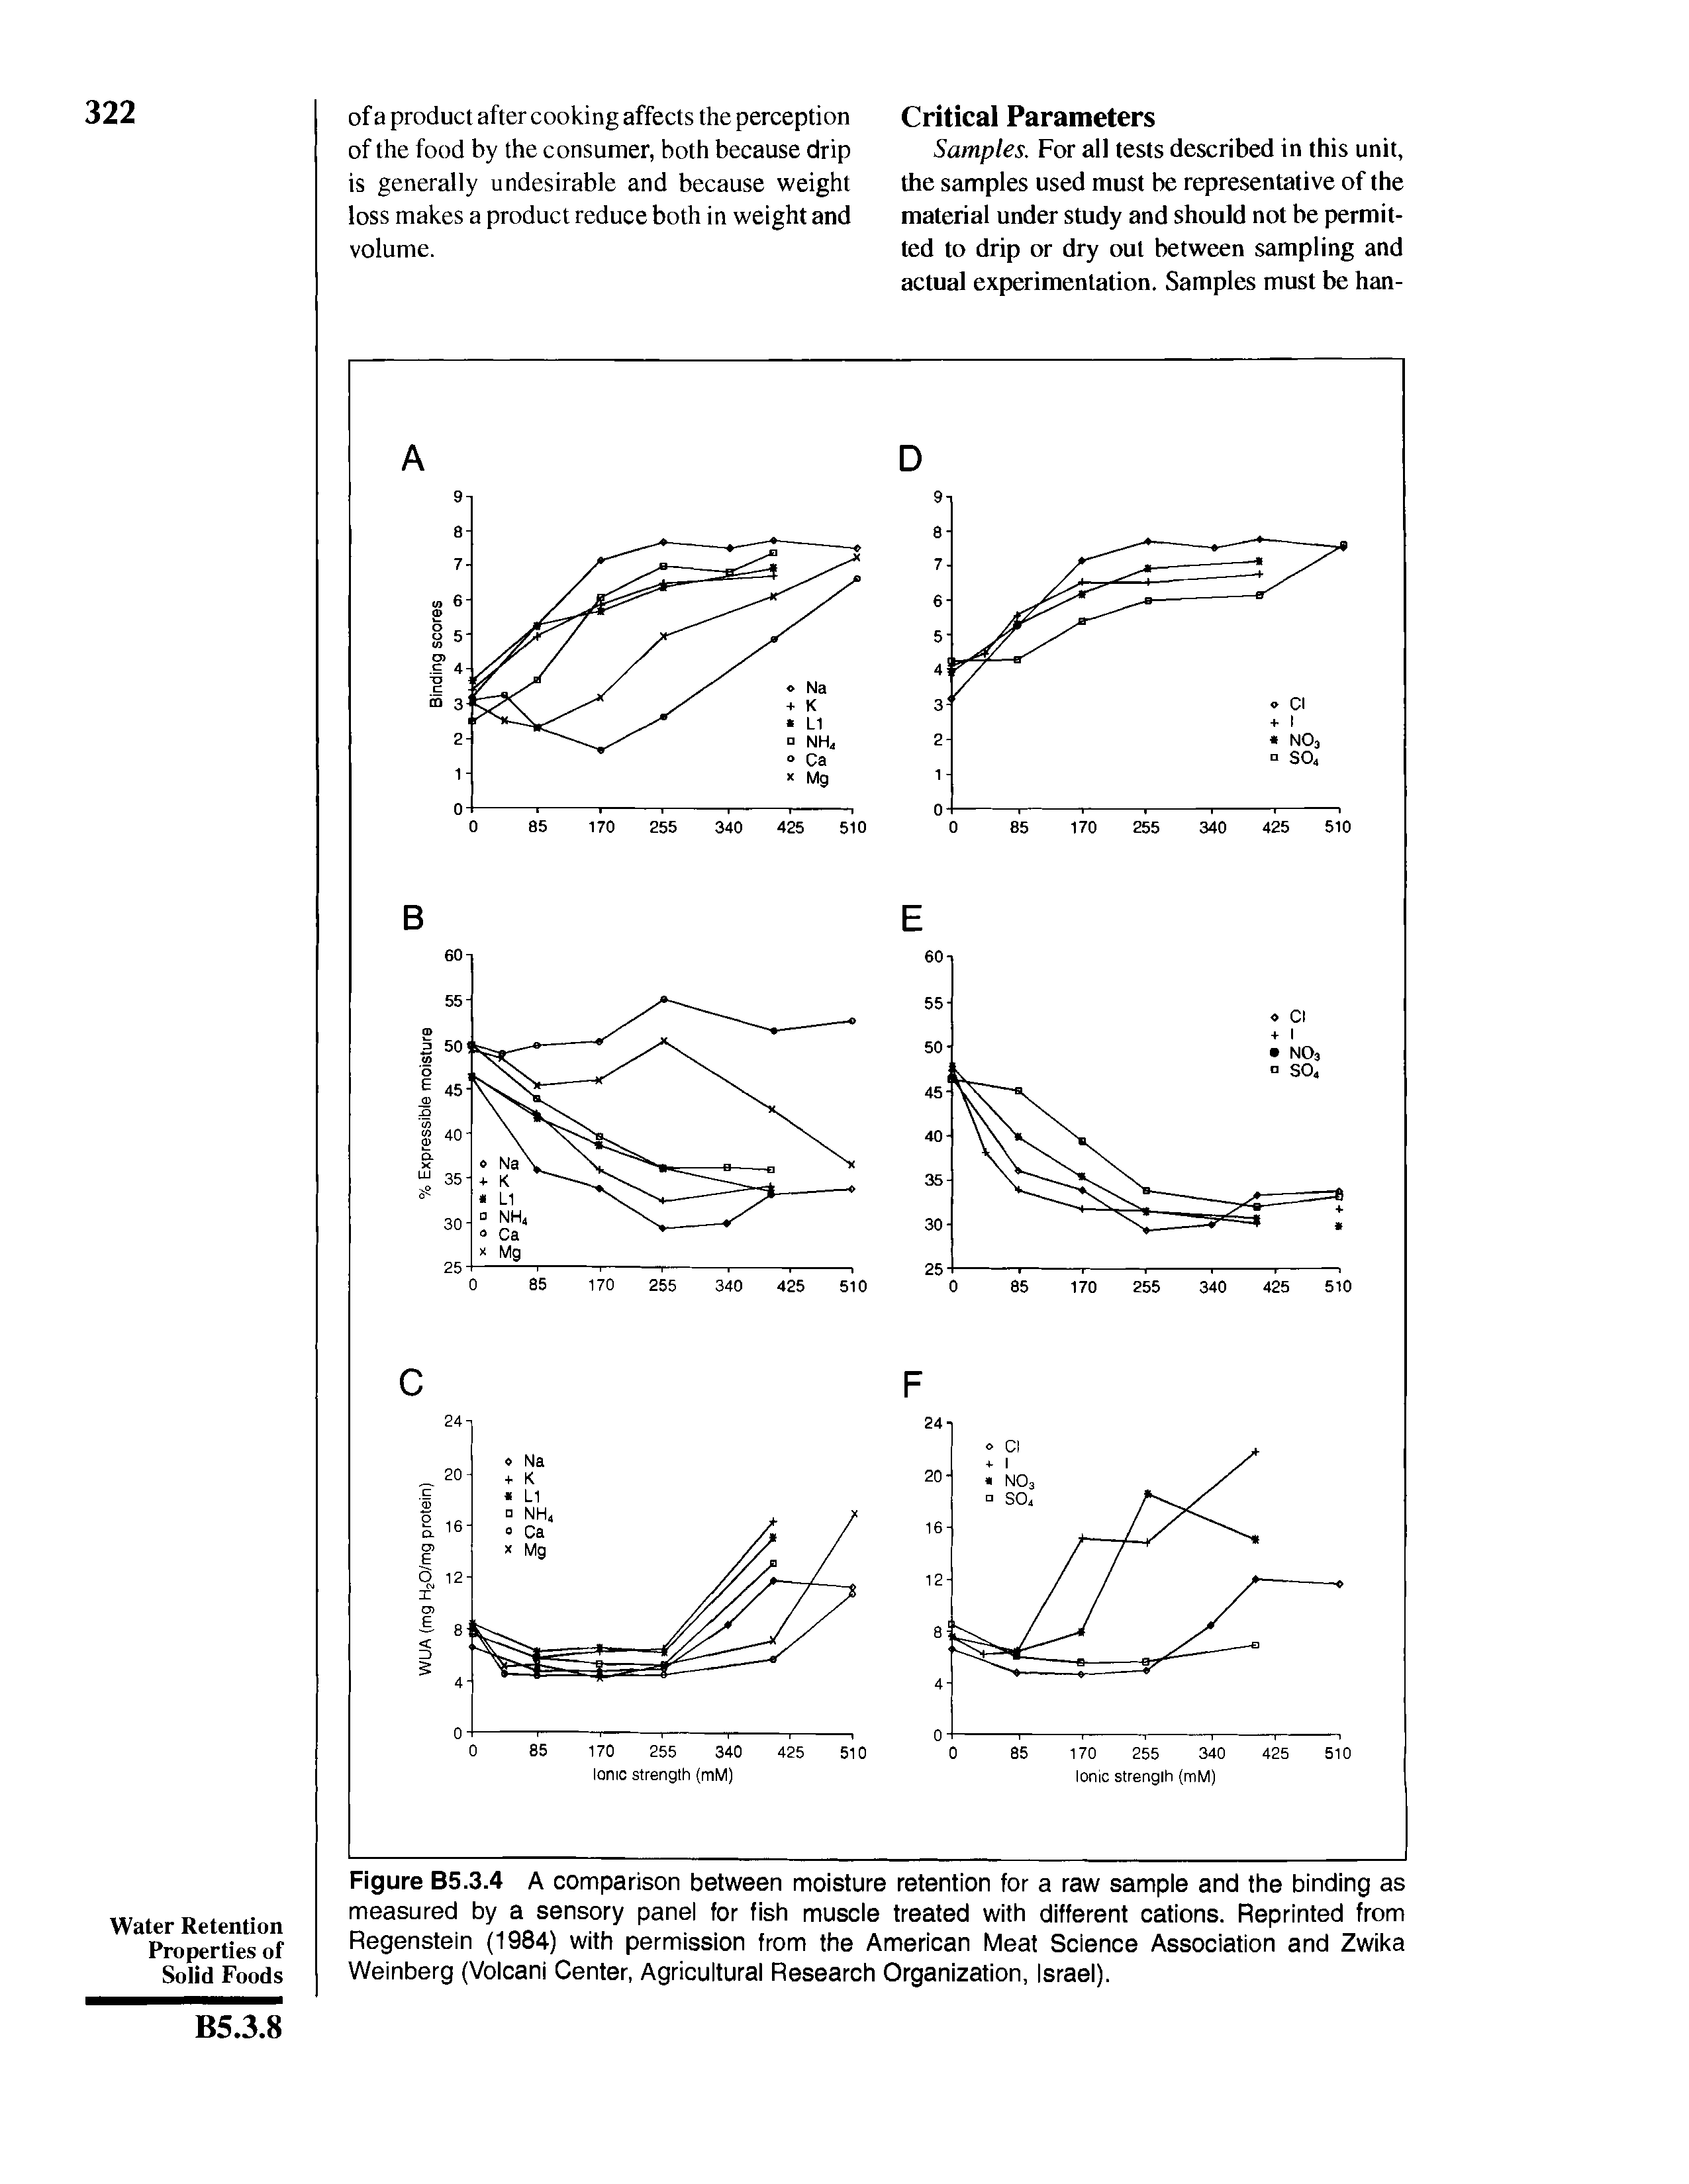 Figure B5.3.4 A comparison between moisture retention for a raw sample and the binding as measured by a sensory panel for fish muscle treated with different cations. Reprinted from Regenstein (1984) with permission from the American Meat Science Association and Zwika Weinberg (Volcani Center, Agricultural Research Organization, Israel).